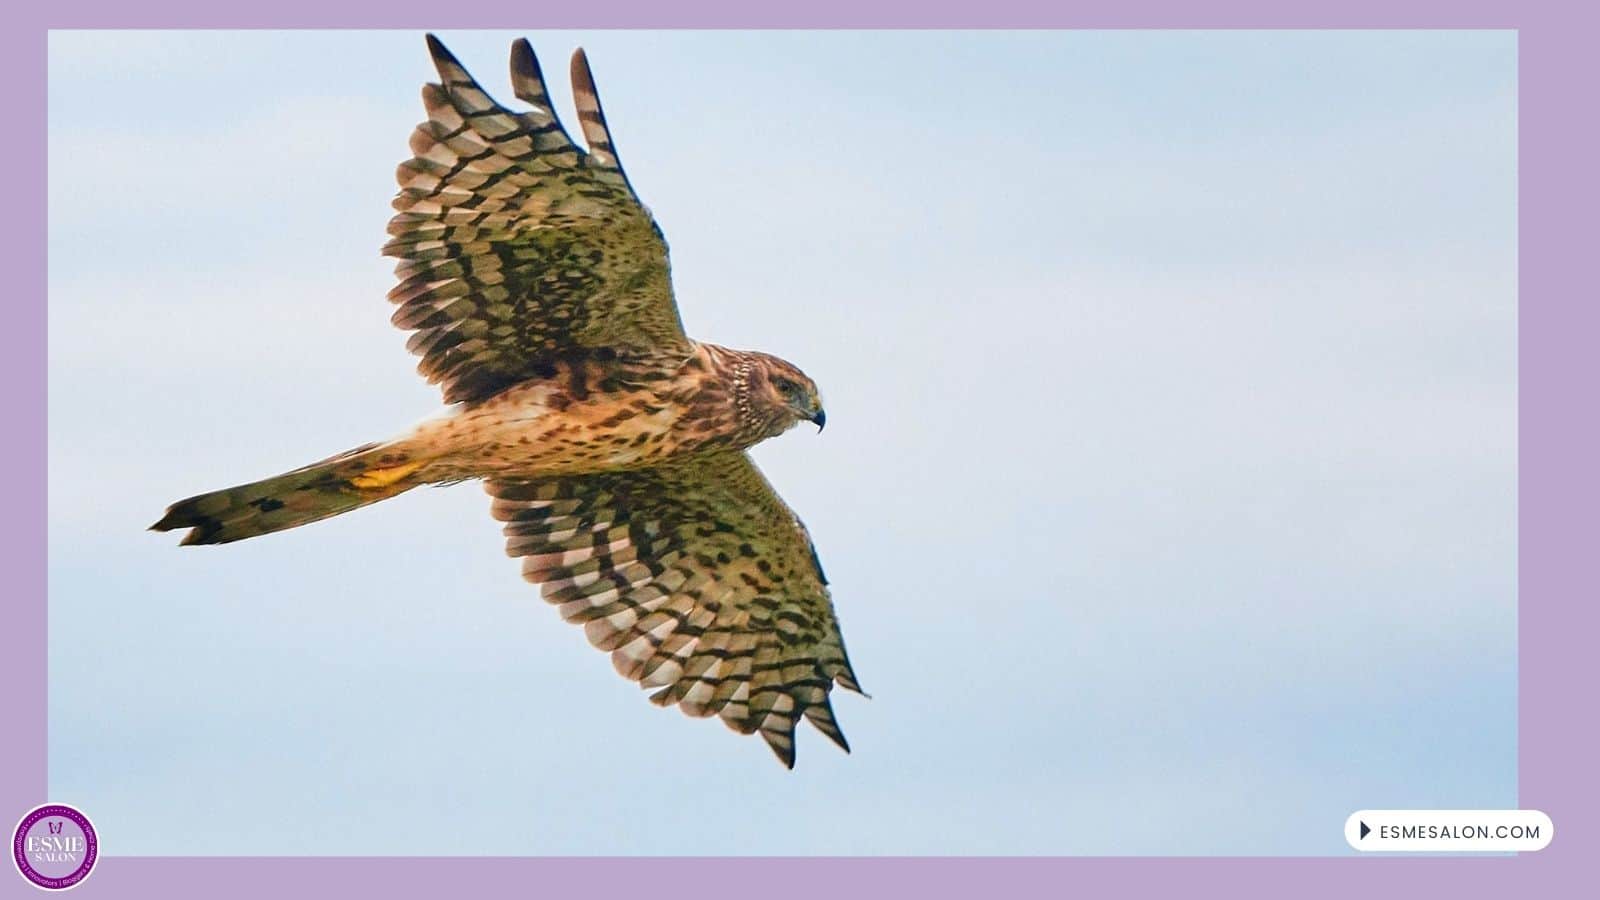 an image of a Northern Harrier seen from below